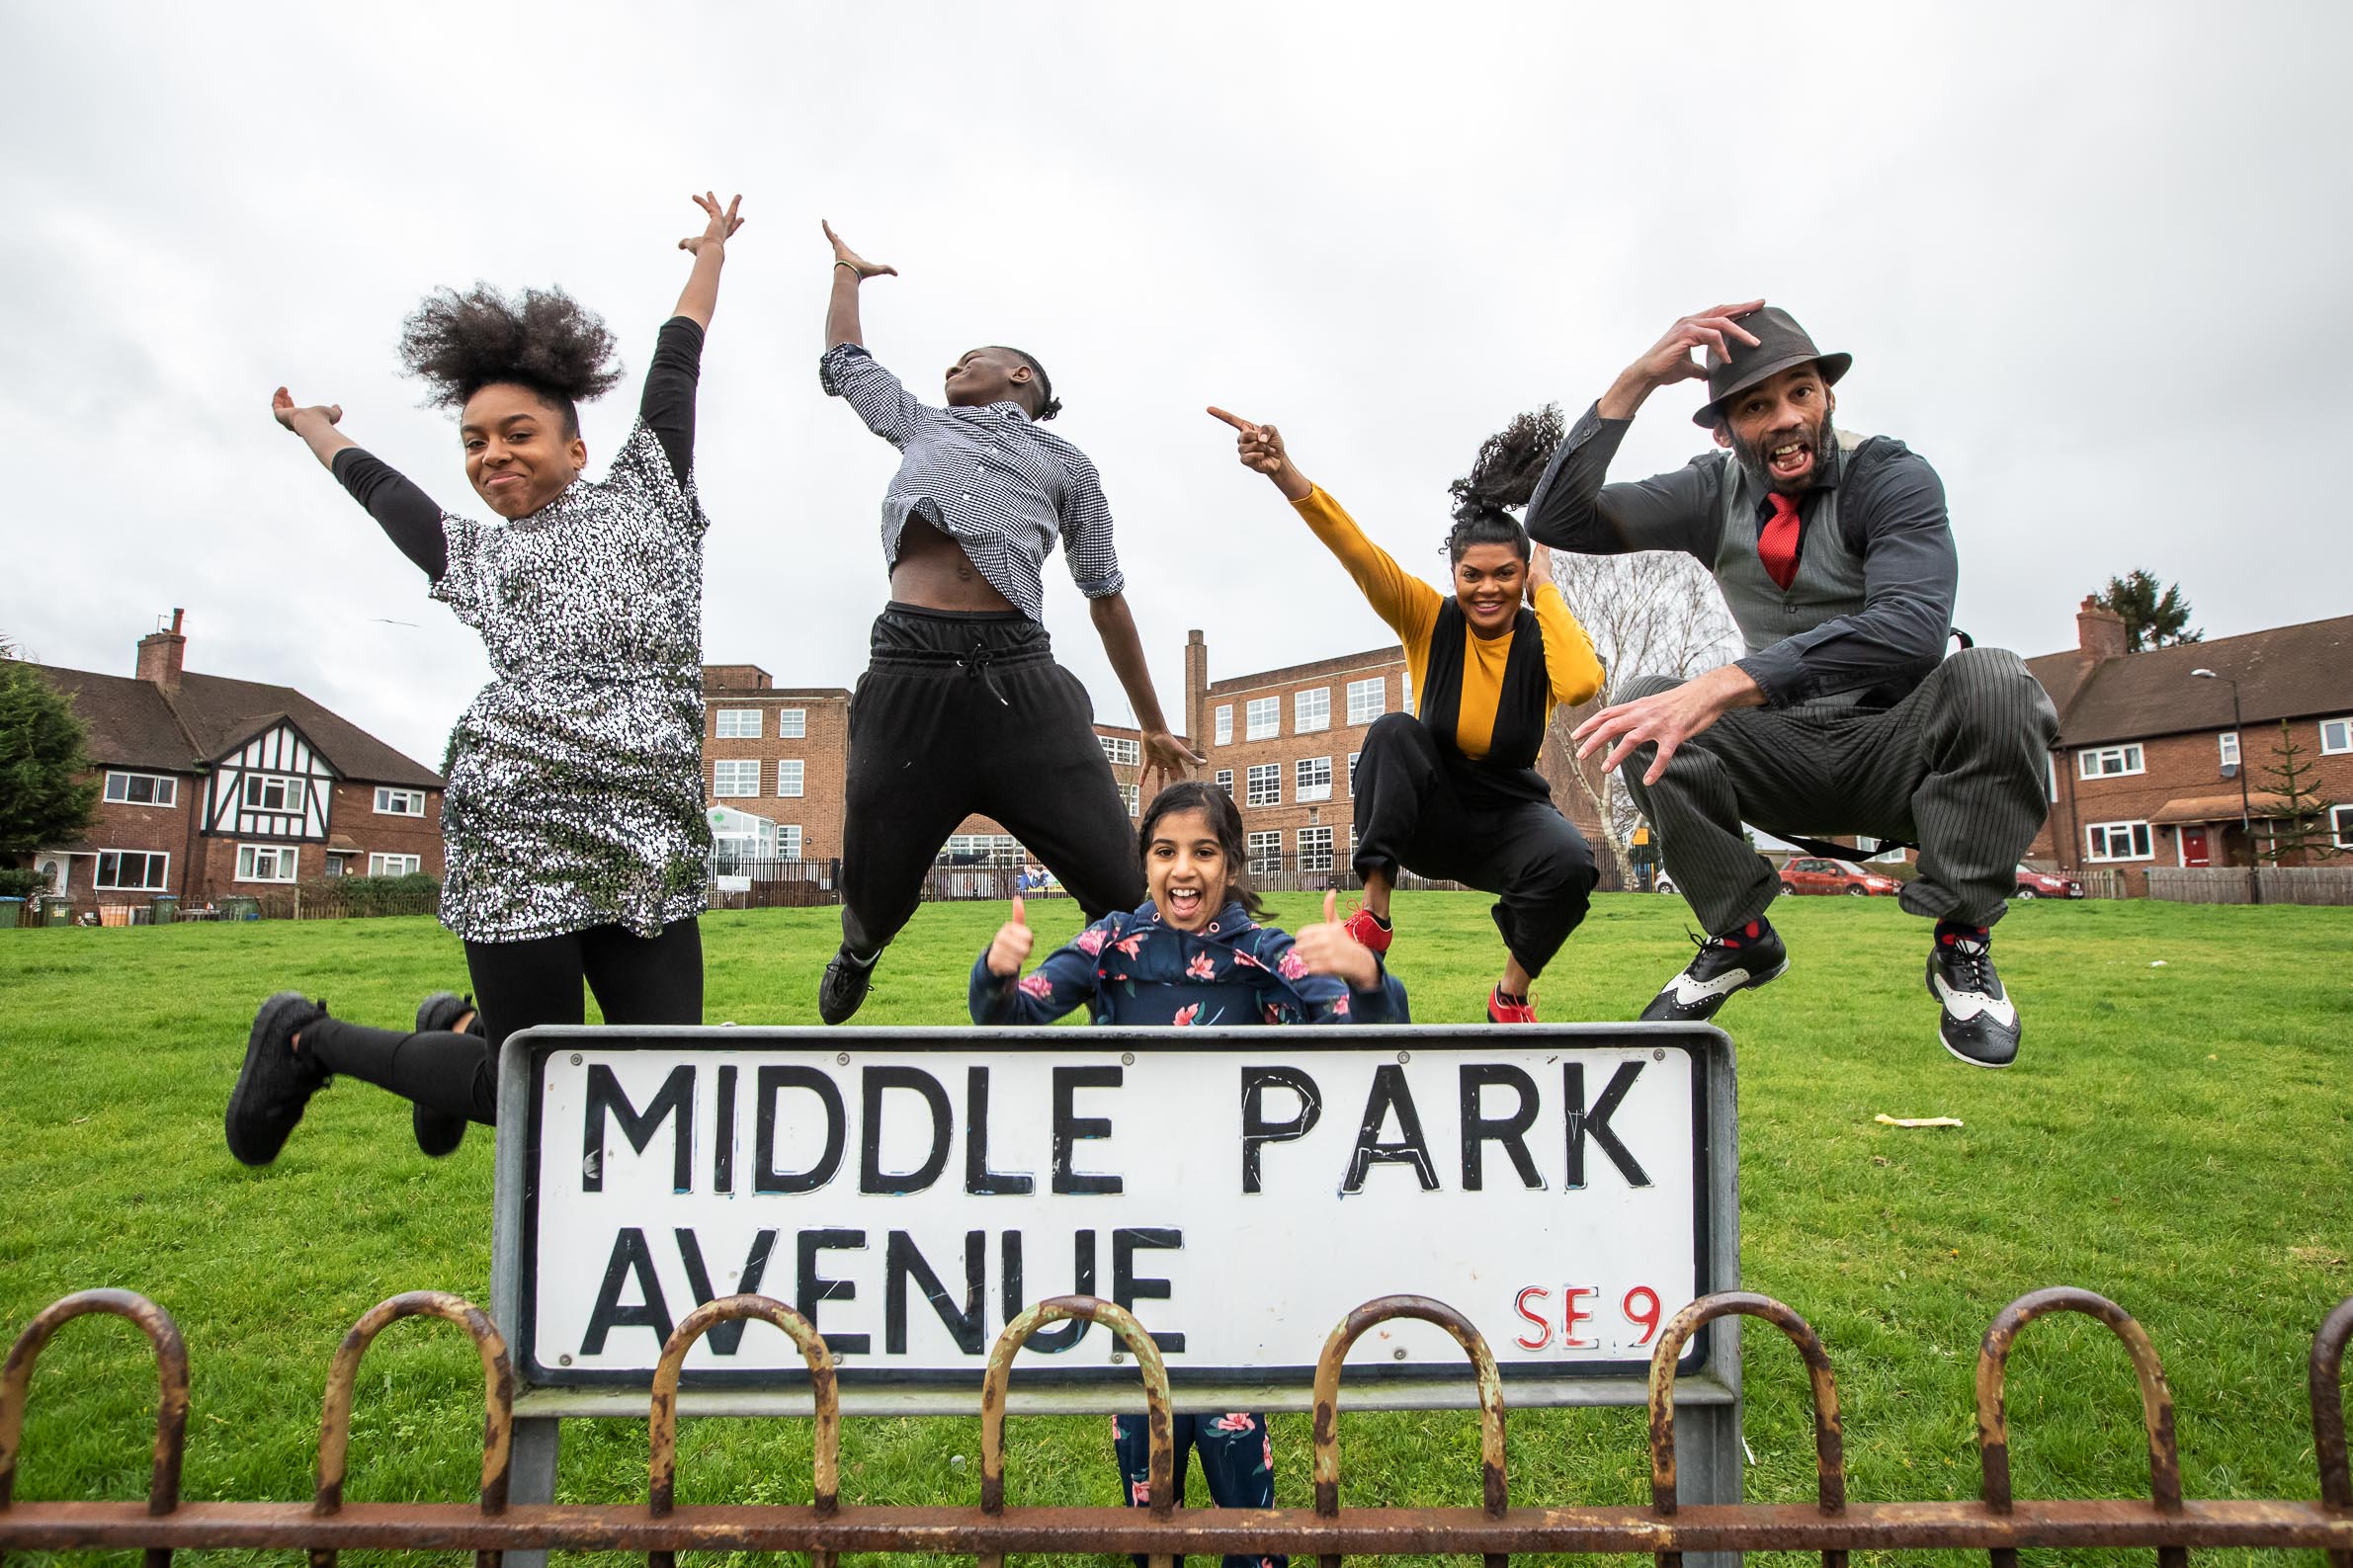 30 years in pictures: Up My Street. Five dancers leap into the air on a village green. In the foreground is a sign that says Middle Park Avenue